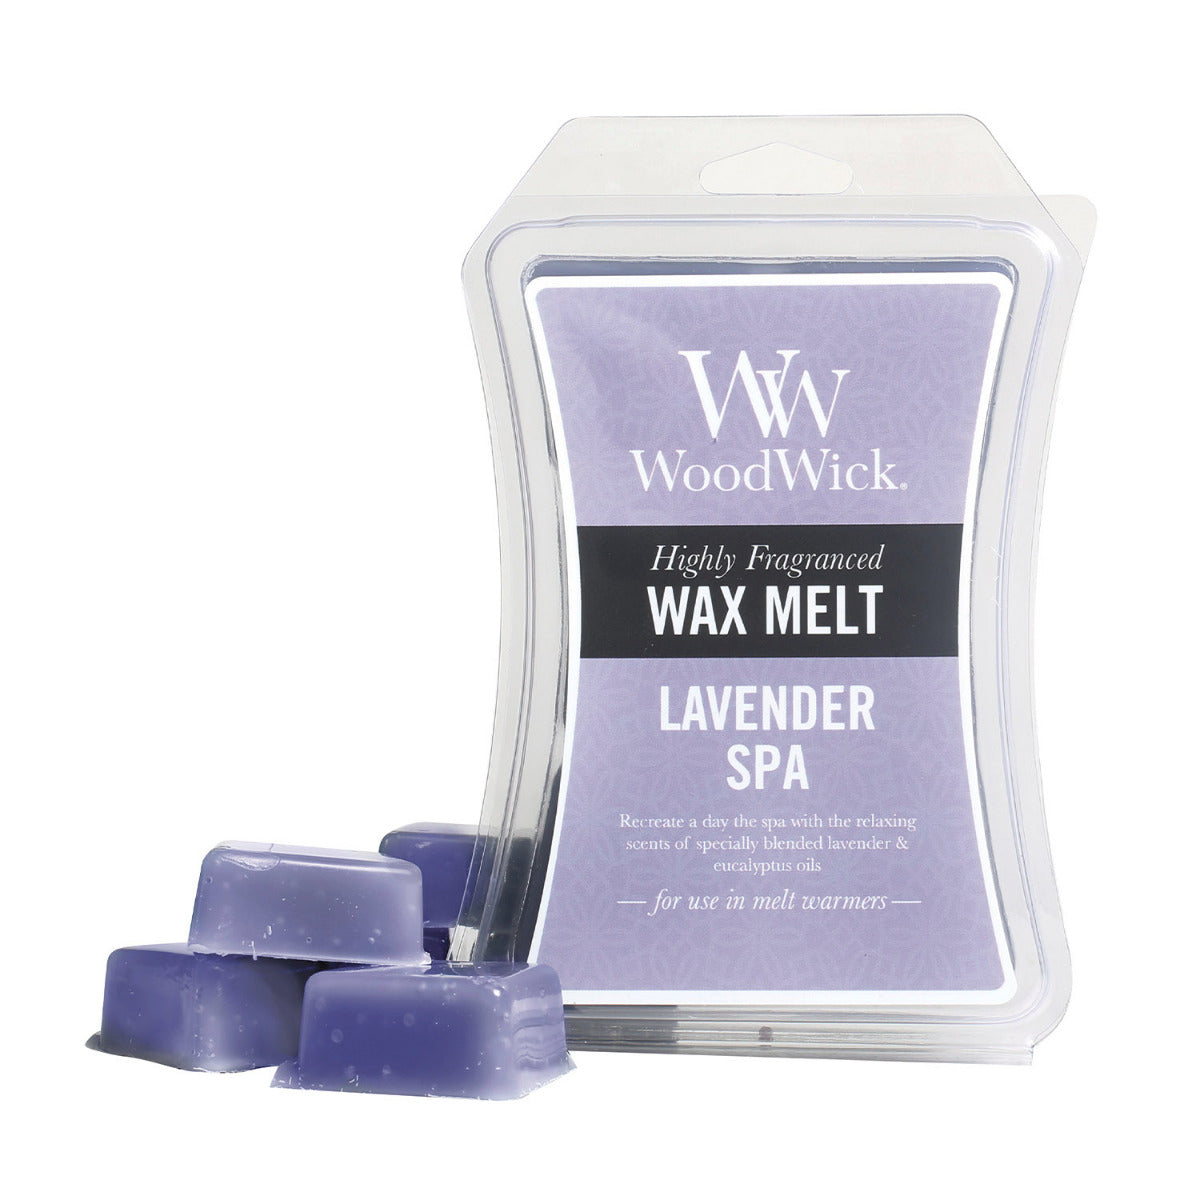 WOODWICK LAVENDER SPA WAX MELT - Gifts R Us